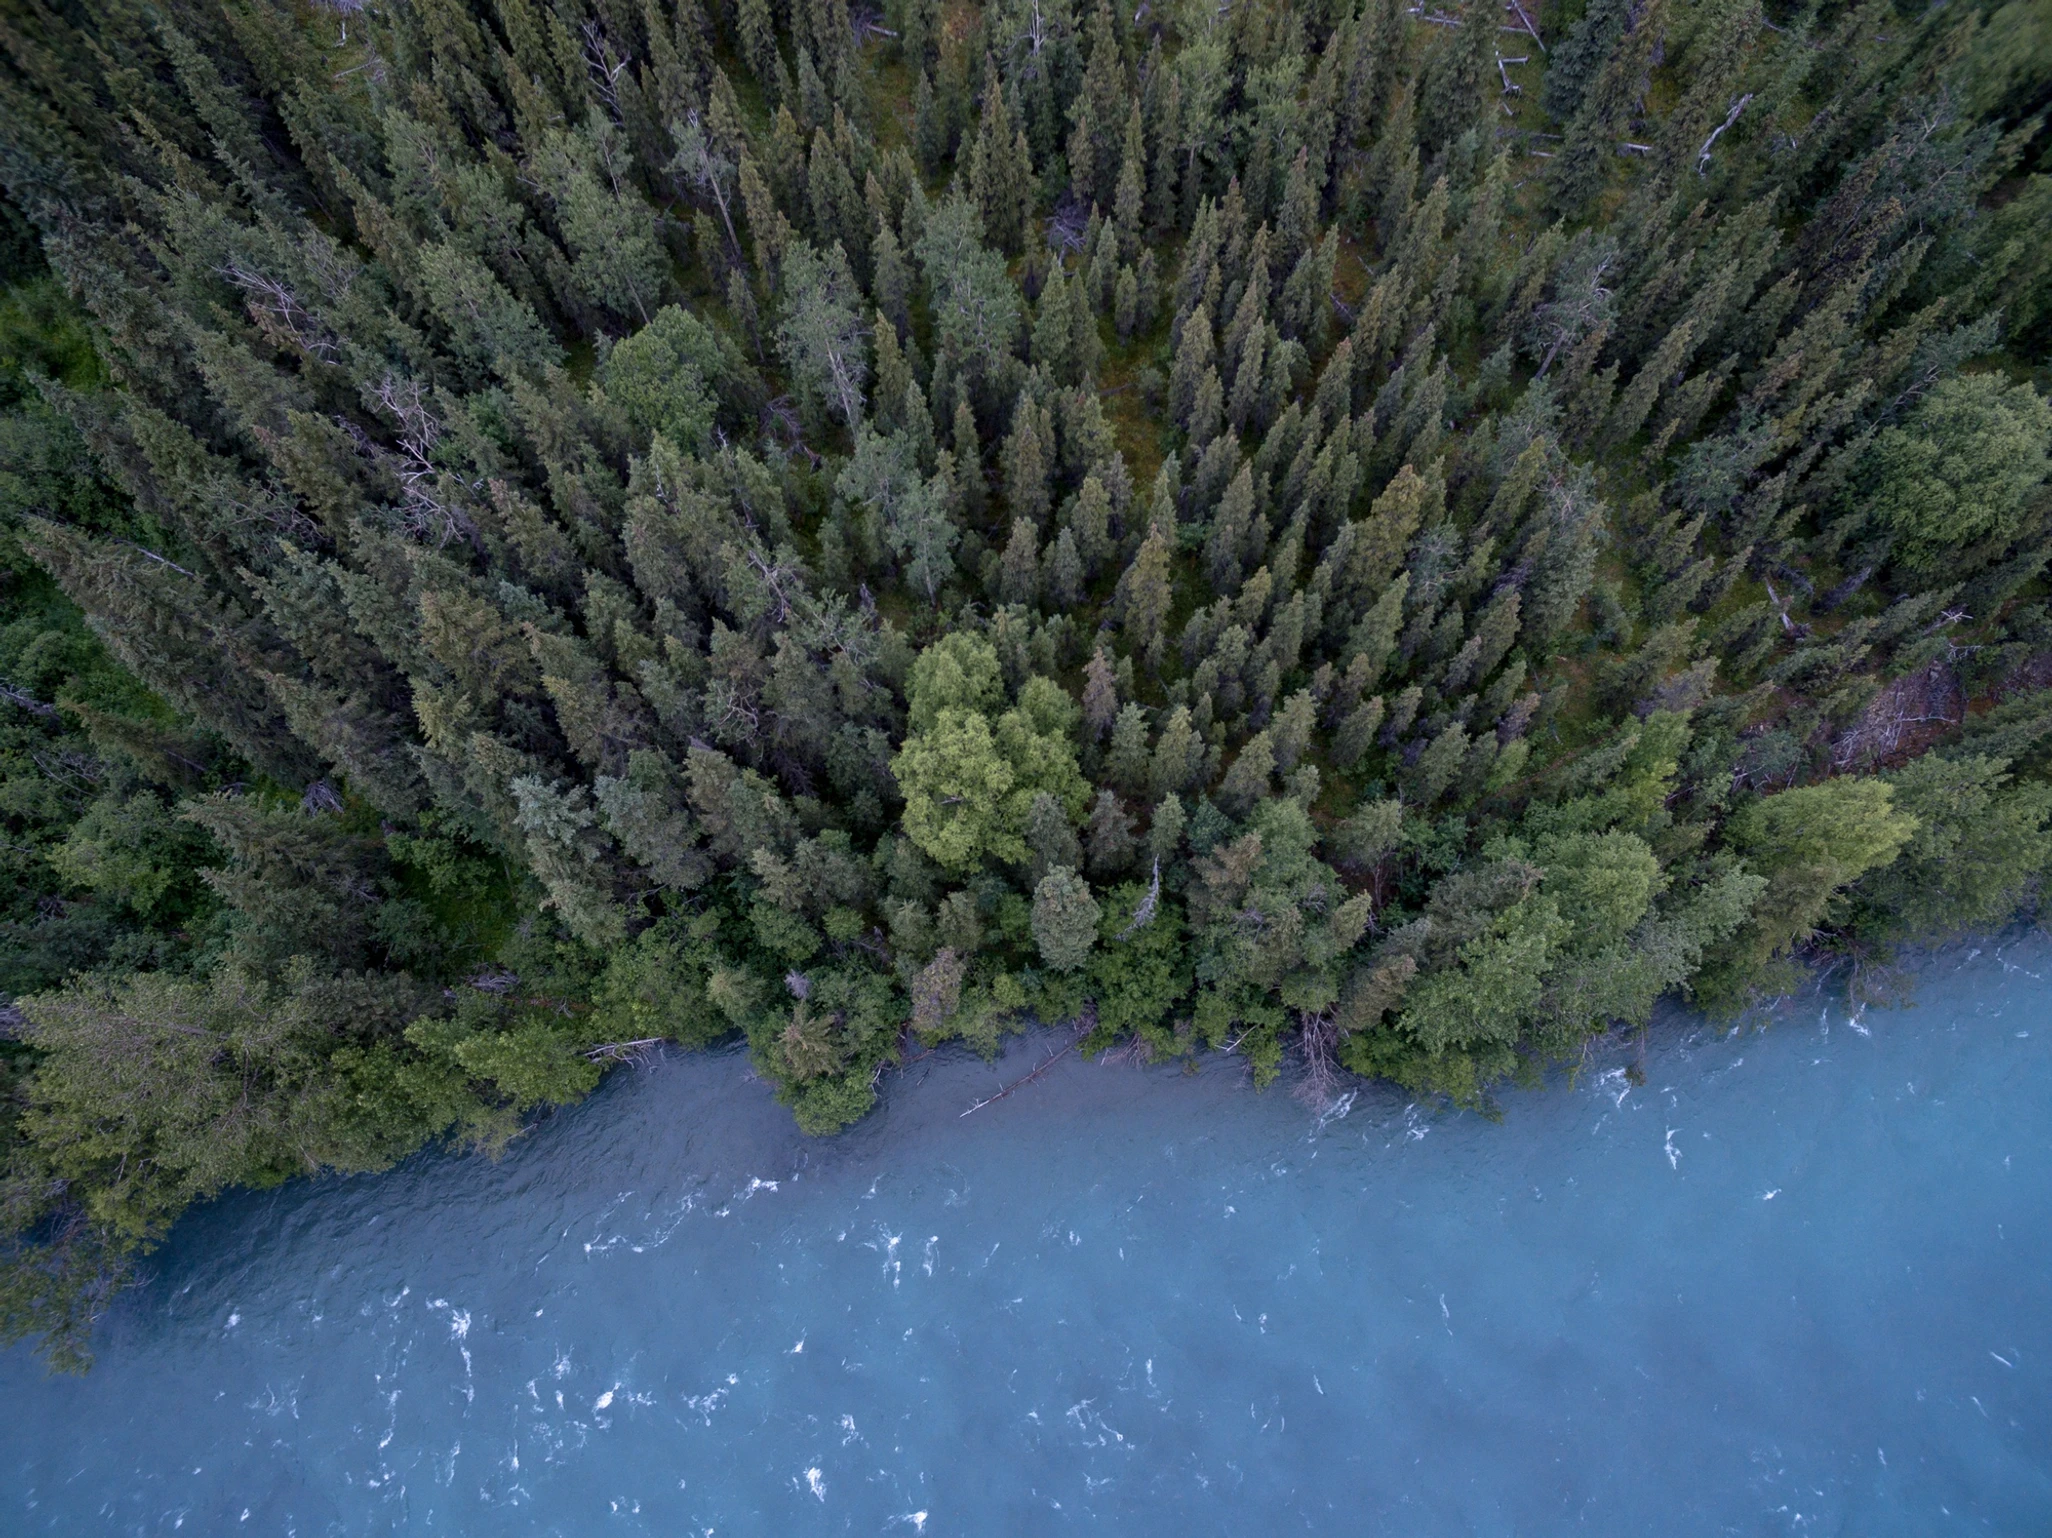 Landscape of trees and river from above.